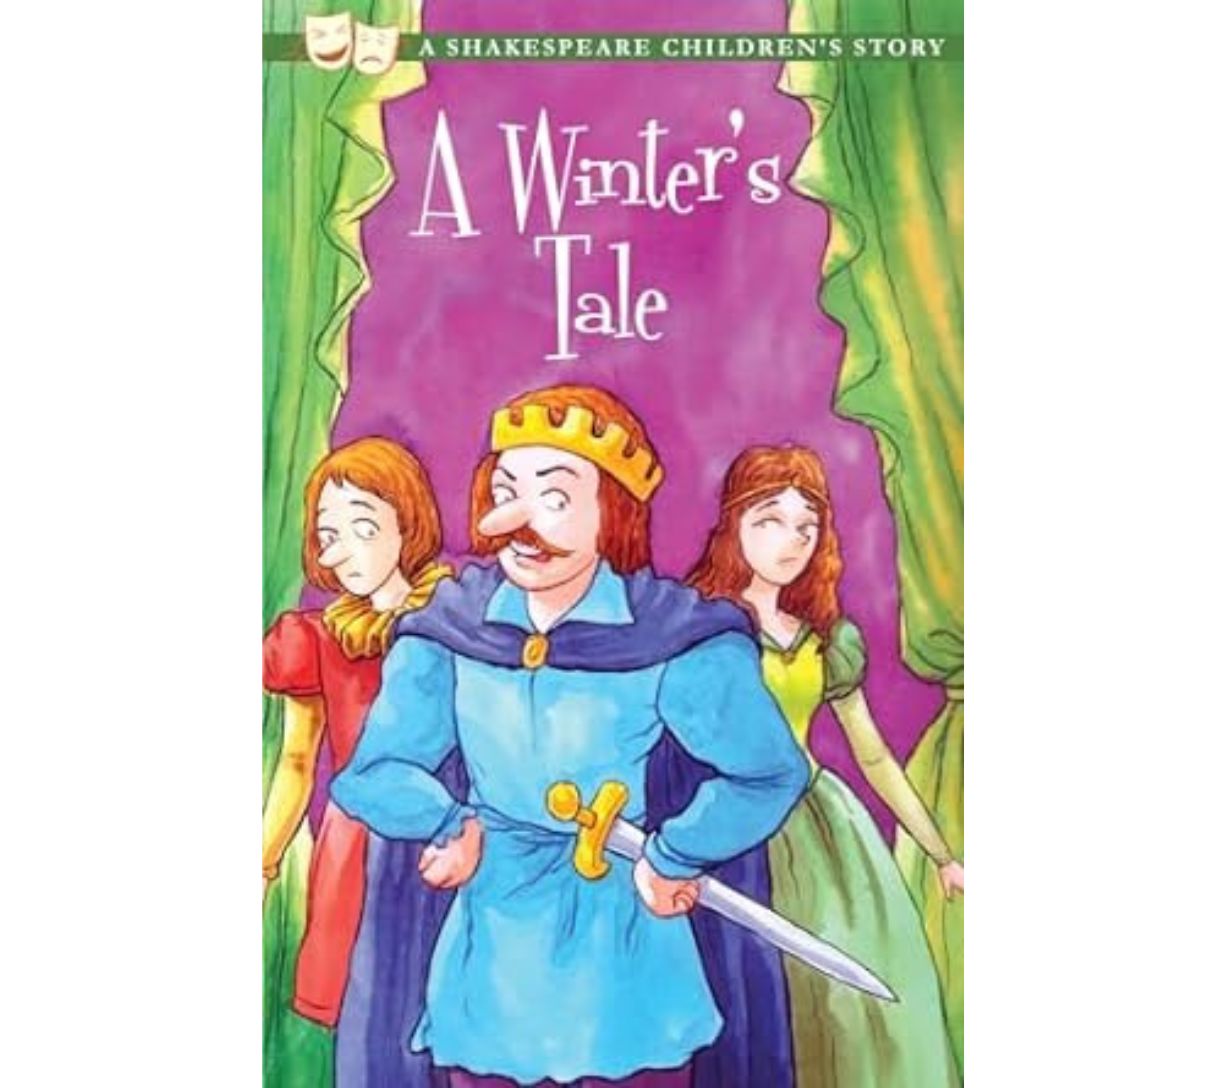 Shakespeare Children's Story - A Winter's Tale